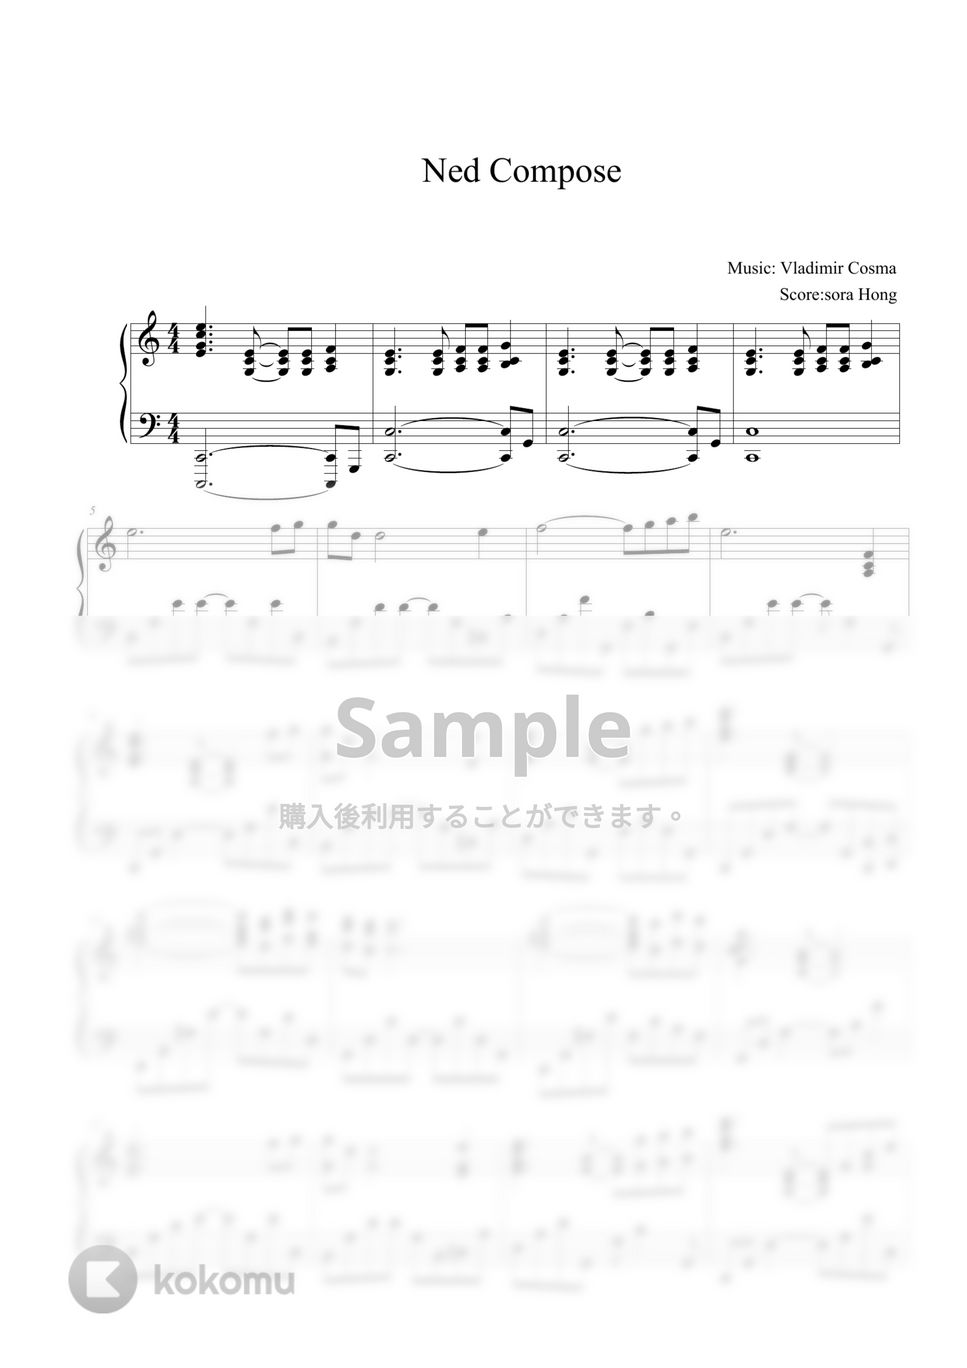 Vladimir Cosma - Ned Compose(L'etudiante/The Student) OST by sora Hong